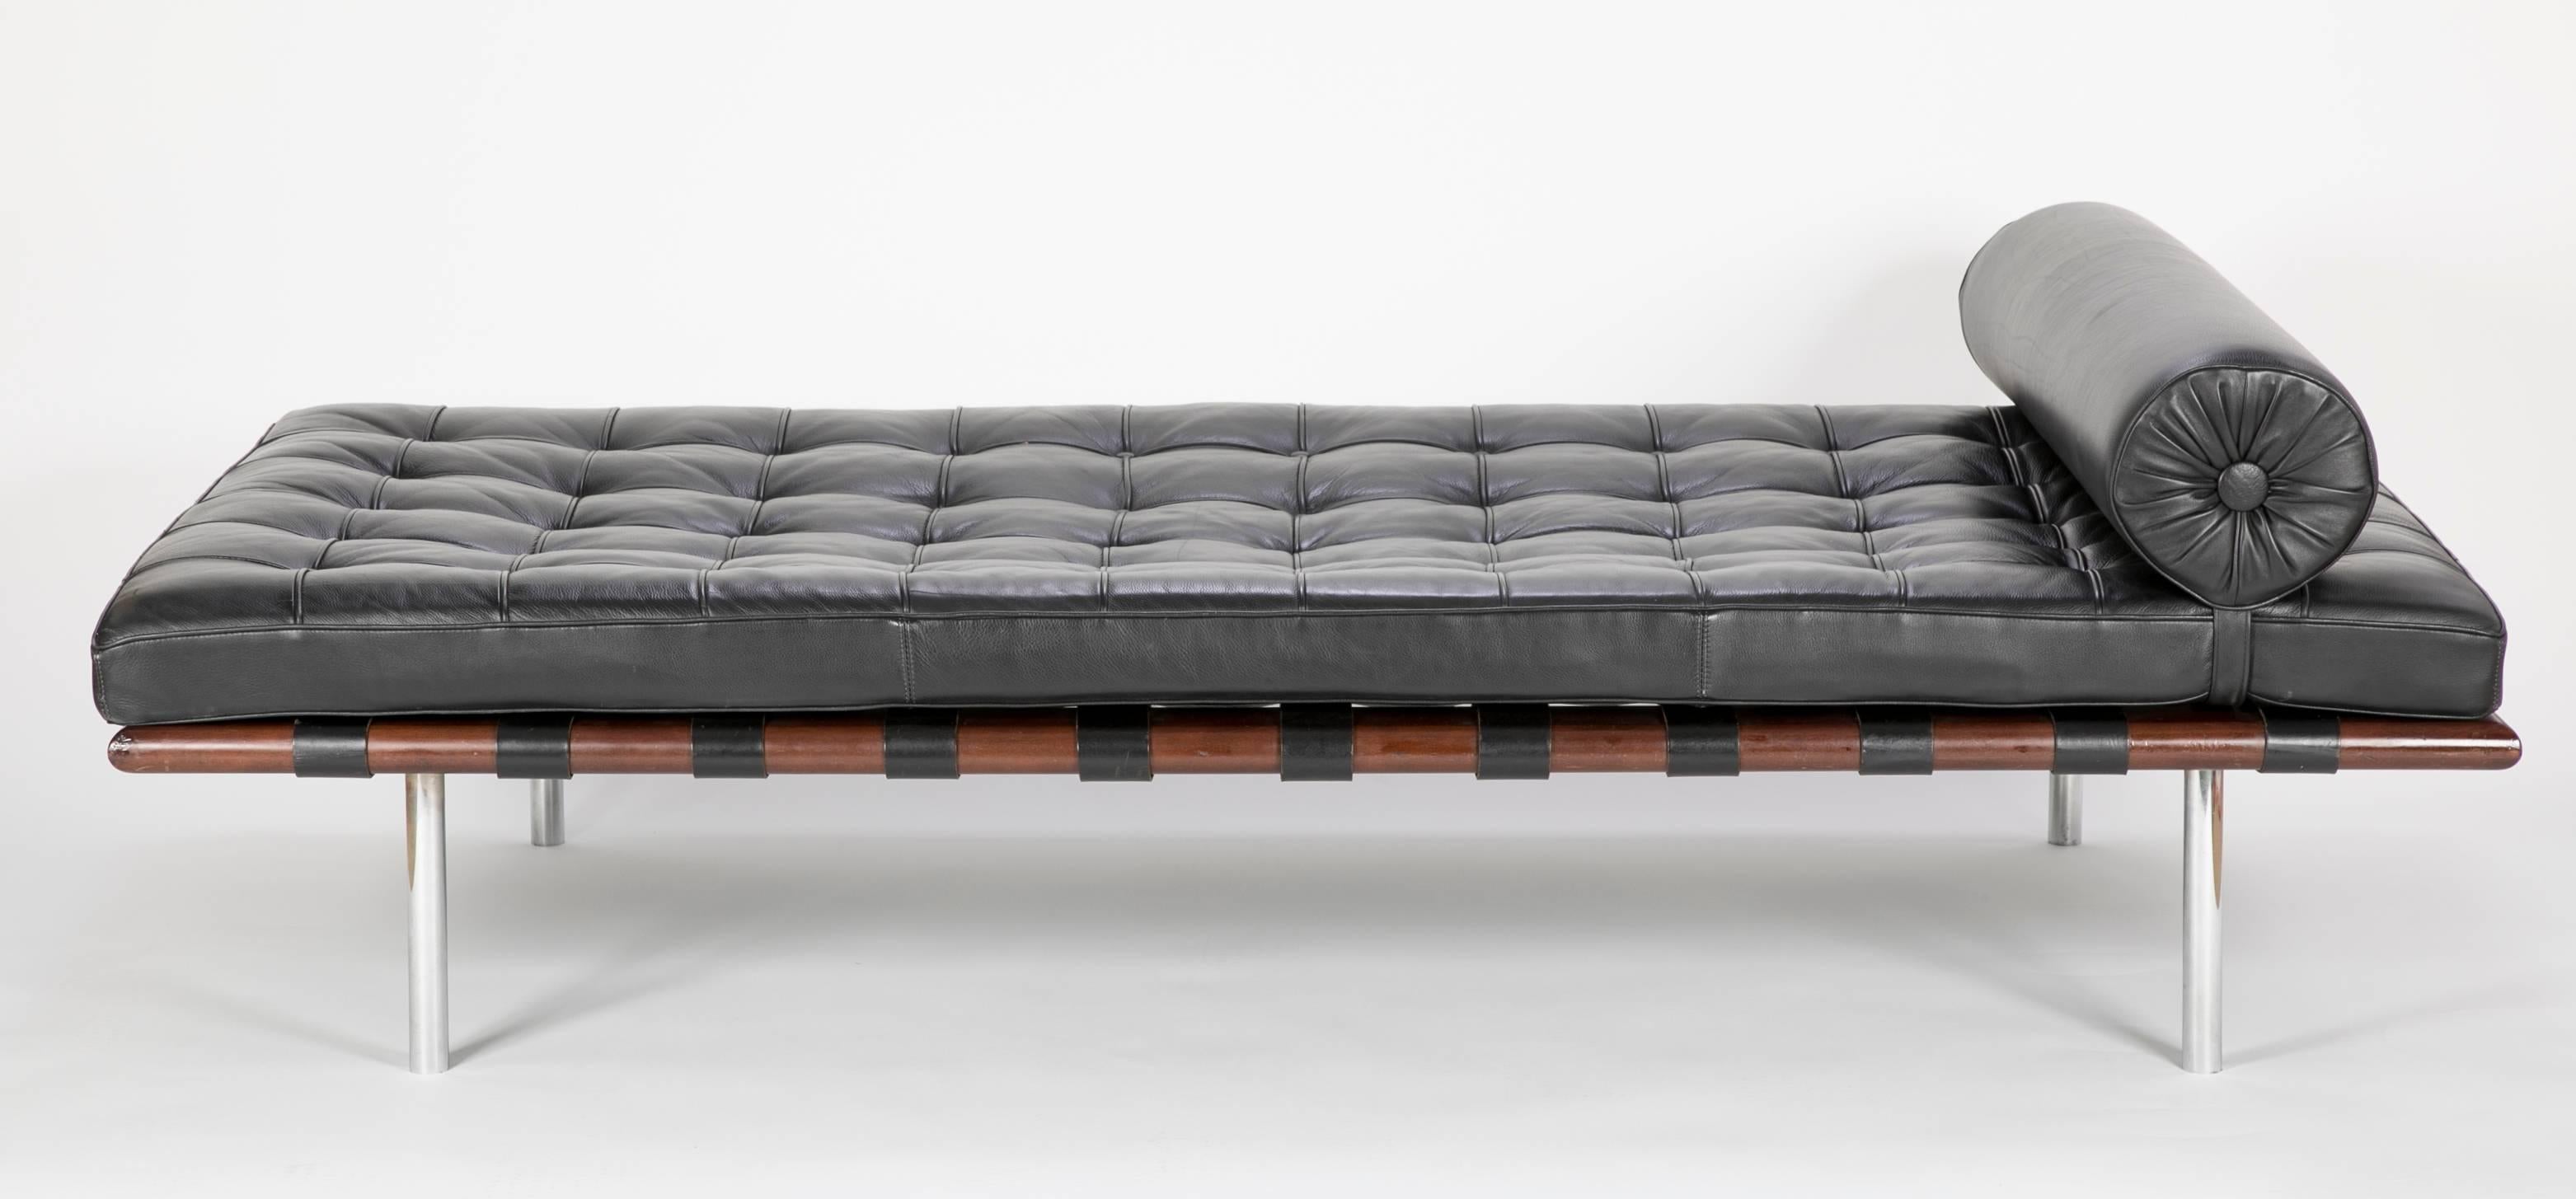 A daybed designed by Mies van der Rohe and produced almost certainly by Knoll. The quality of both the leather and the construction technics and materials all point to this piece being produced by Knoll International. Please note the chrome cross